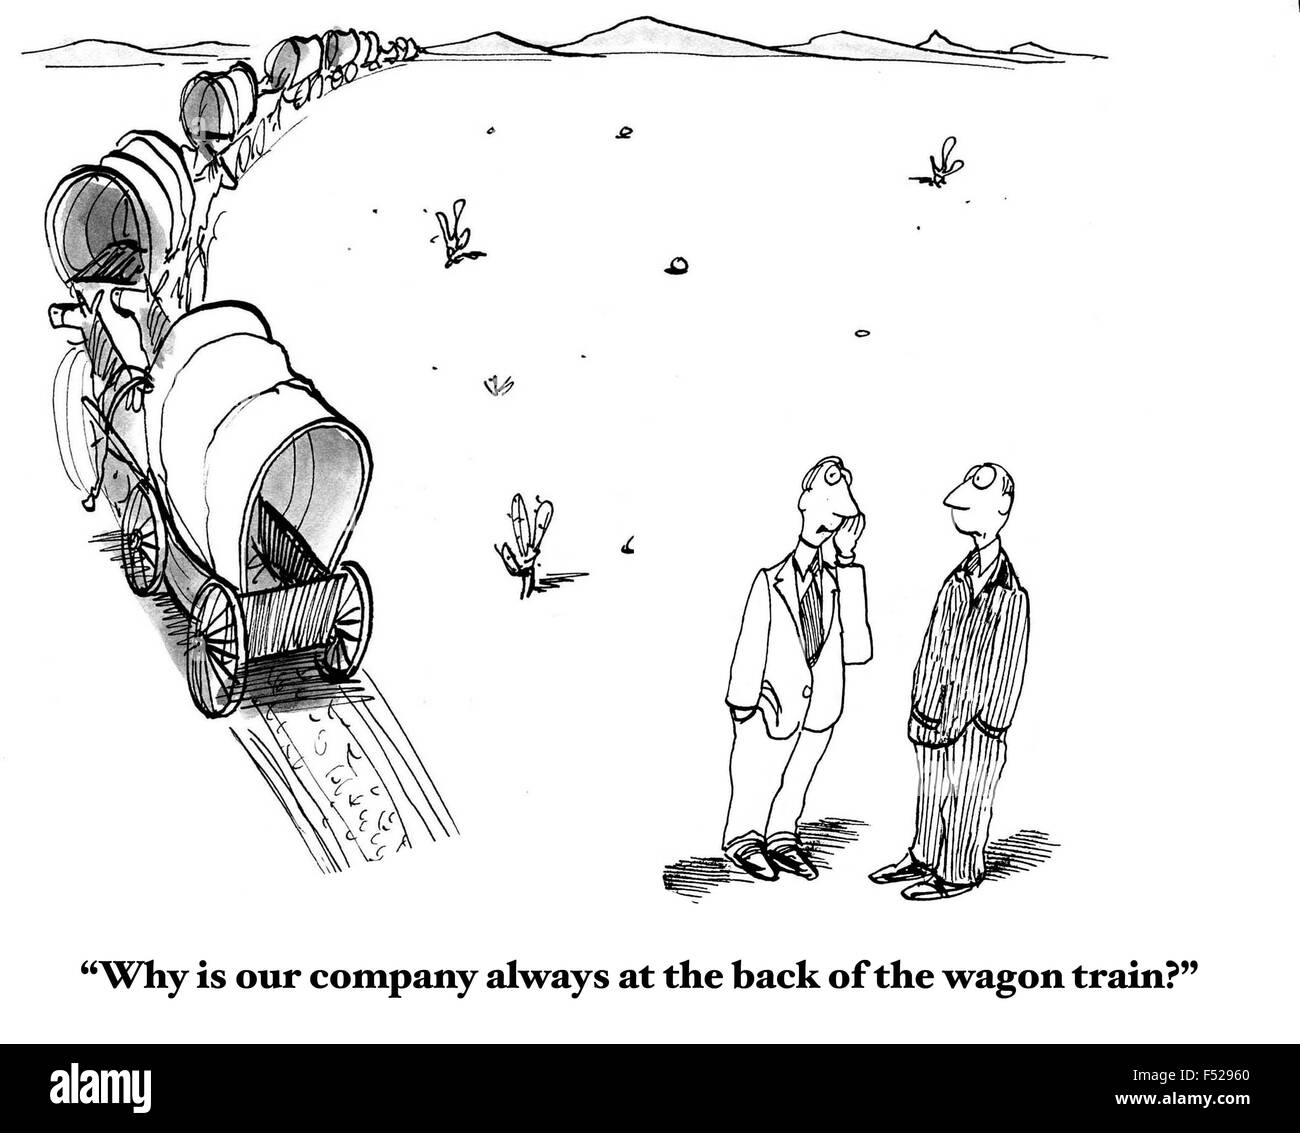 Business cartoon showing a wagon train in the prairie, 'Why is our company always at the back of the wagon train?'. Stock Photo